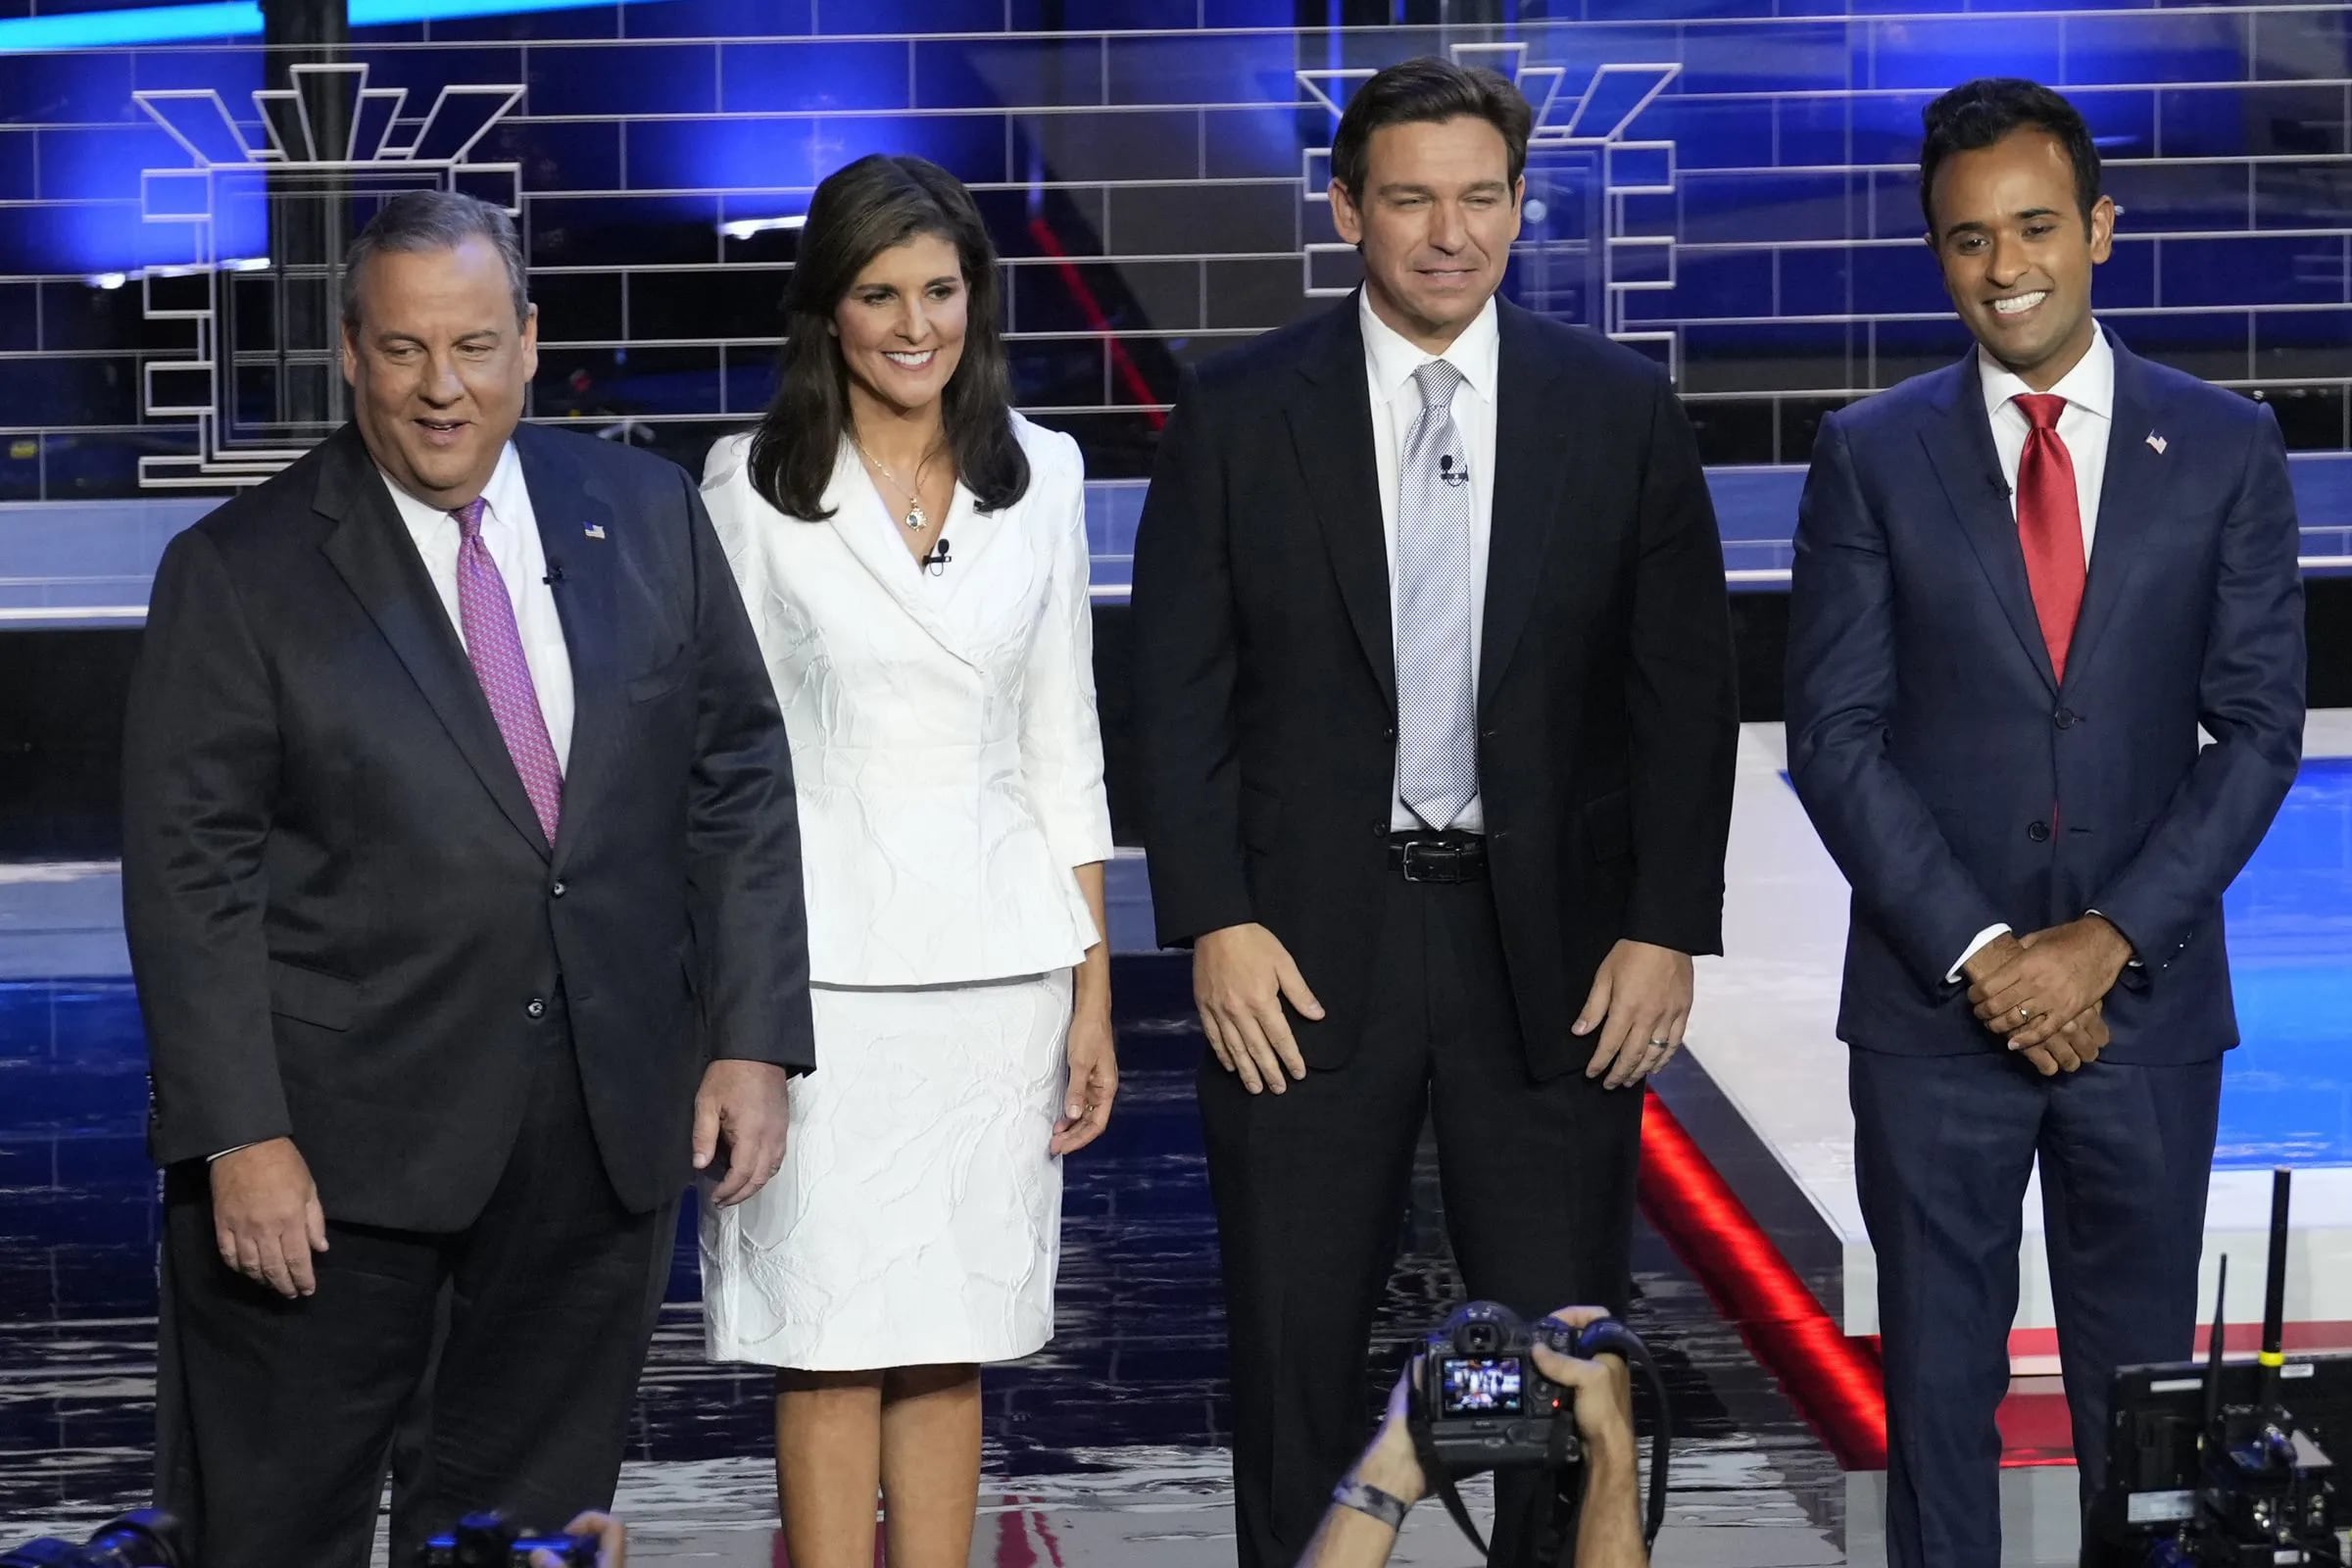 (From left) Chris Christie, Nikki Haley, Ron DeSantis, and Vivek Ramaswamy will face off in the fourth Republican debate Wednesday night.